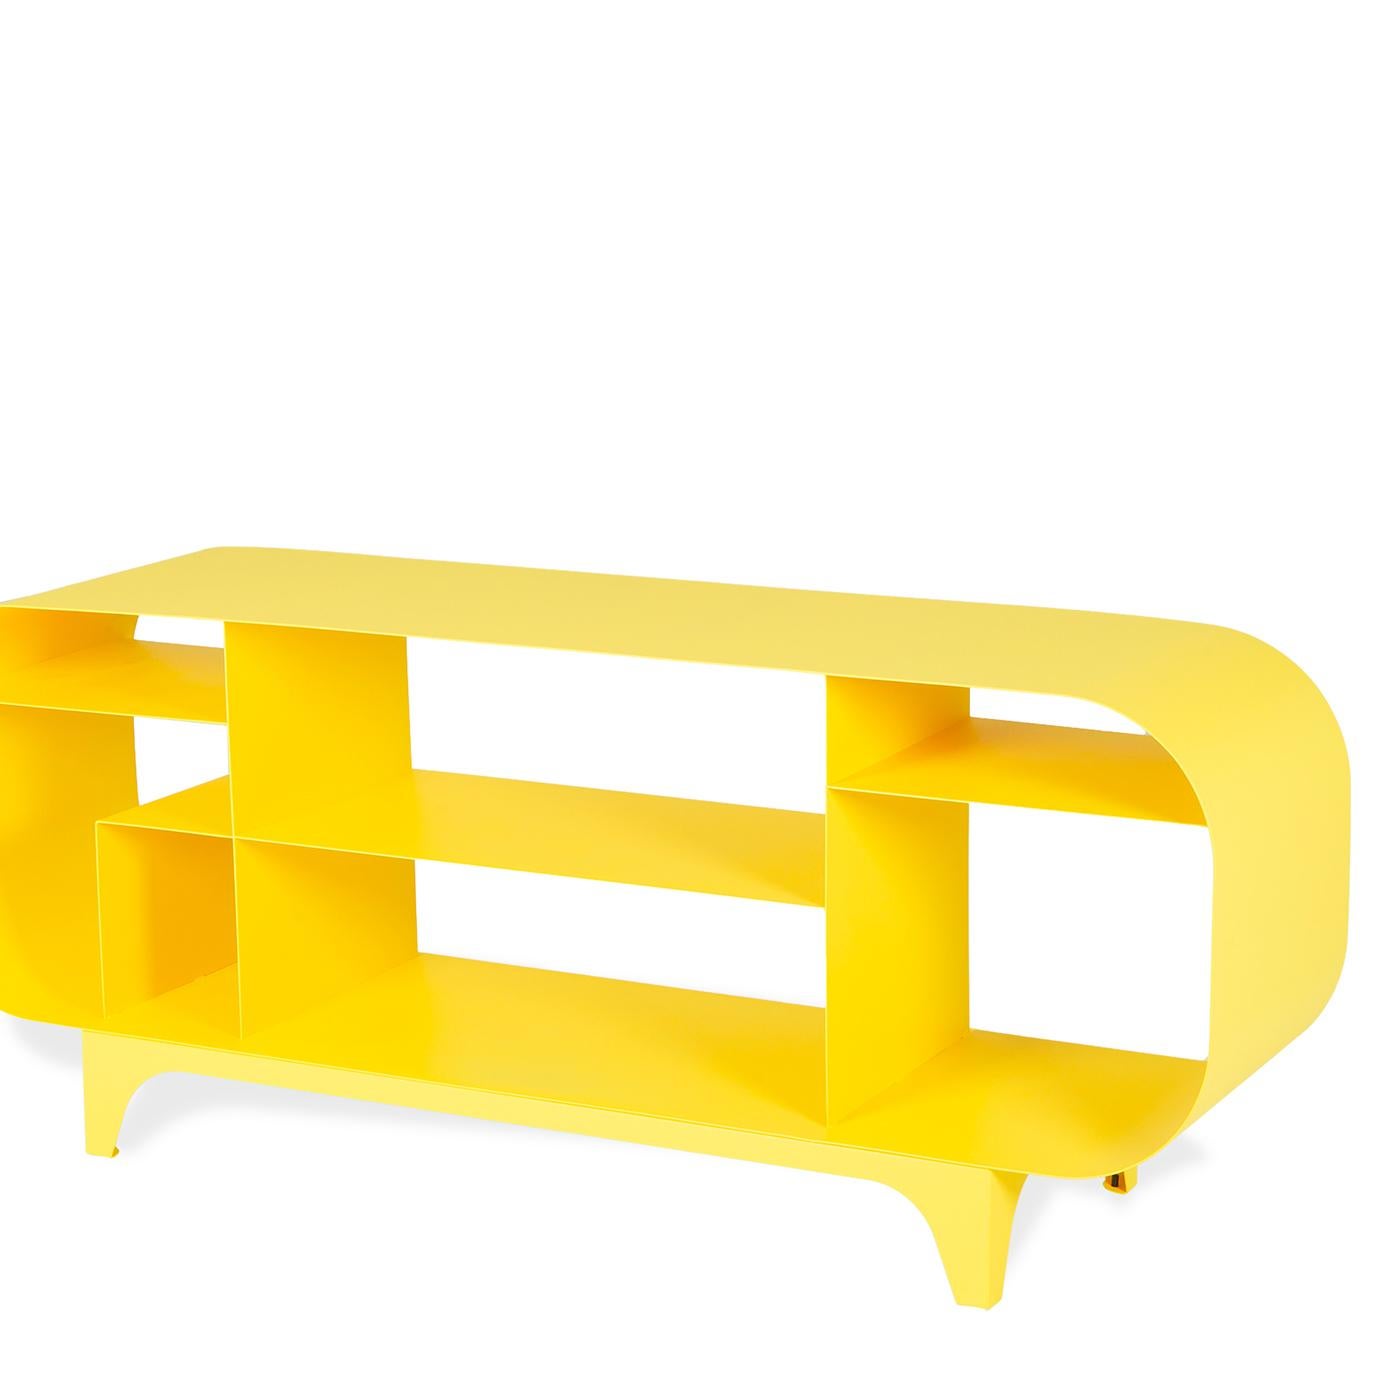 Defined by bold curves and smooth, geometric lines, this exceptional console is crafted of steel sheets in a vivid yellow color and boasts a minimalist design with an elongated oval frame and three shelves arranged at different heights. Combining